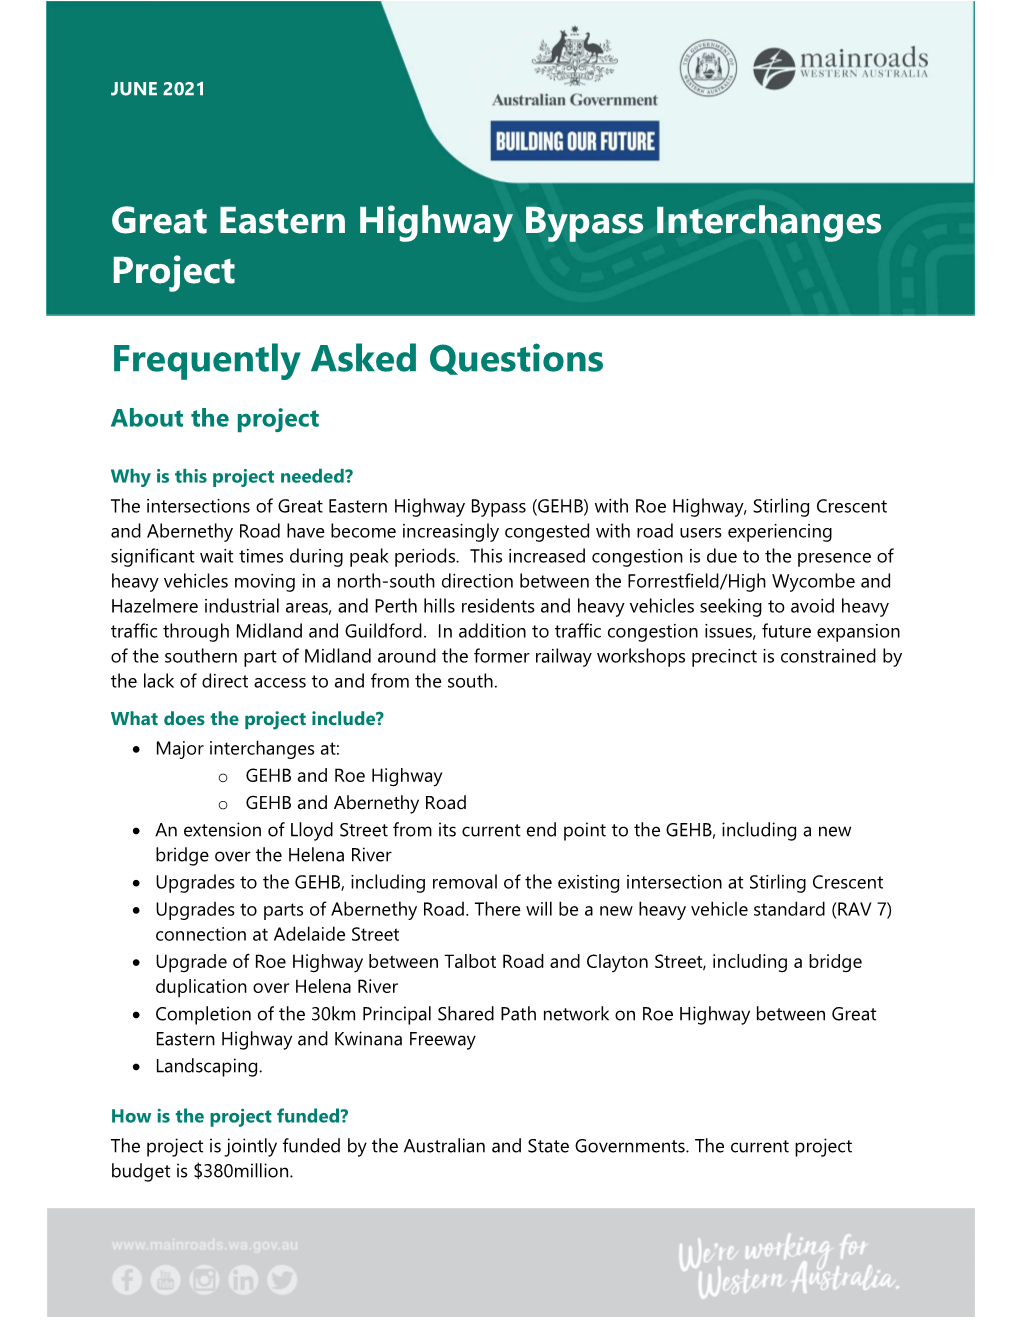 Great Eastern Highway Bypass Interchanges Project Frequently